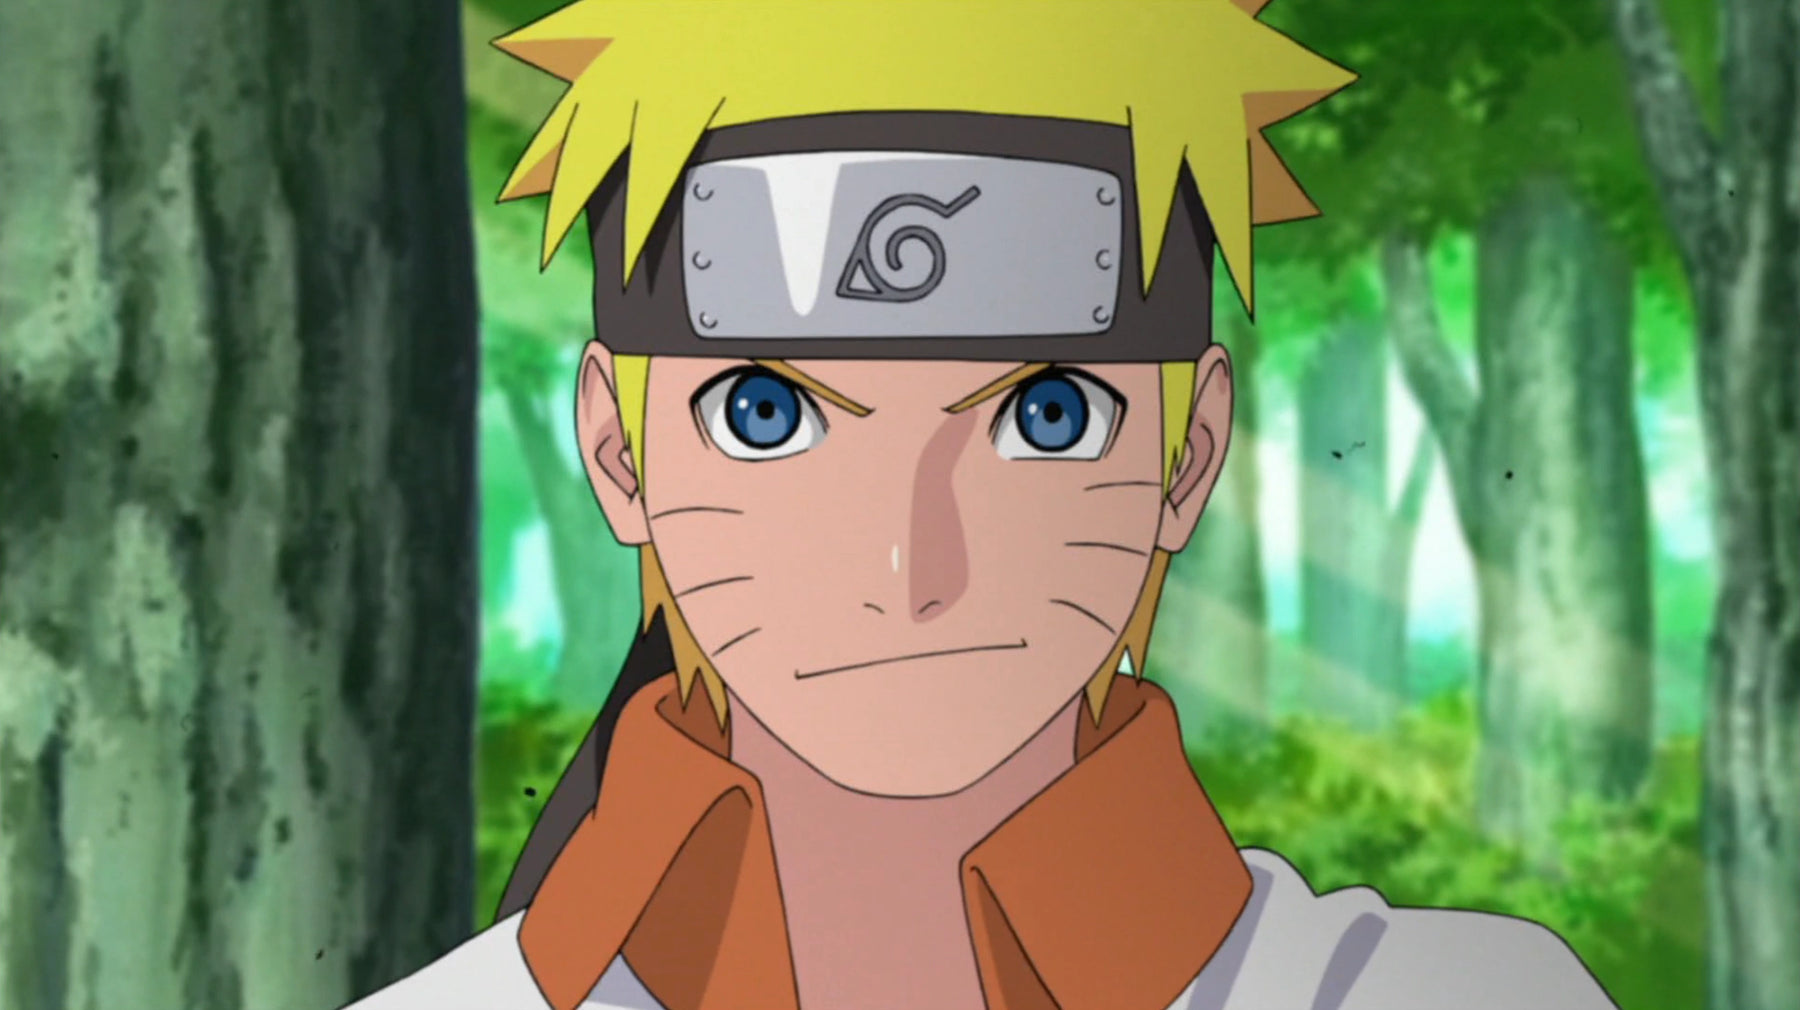 New Naruto Manga's Protagonist Will Be Chosen By Fans